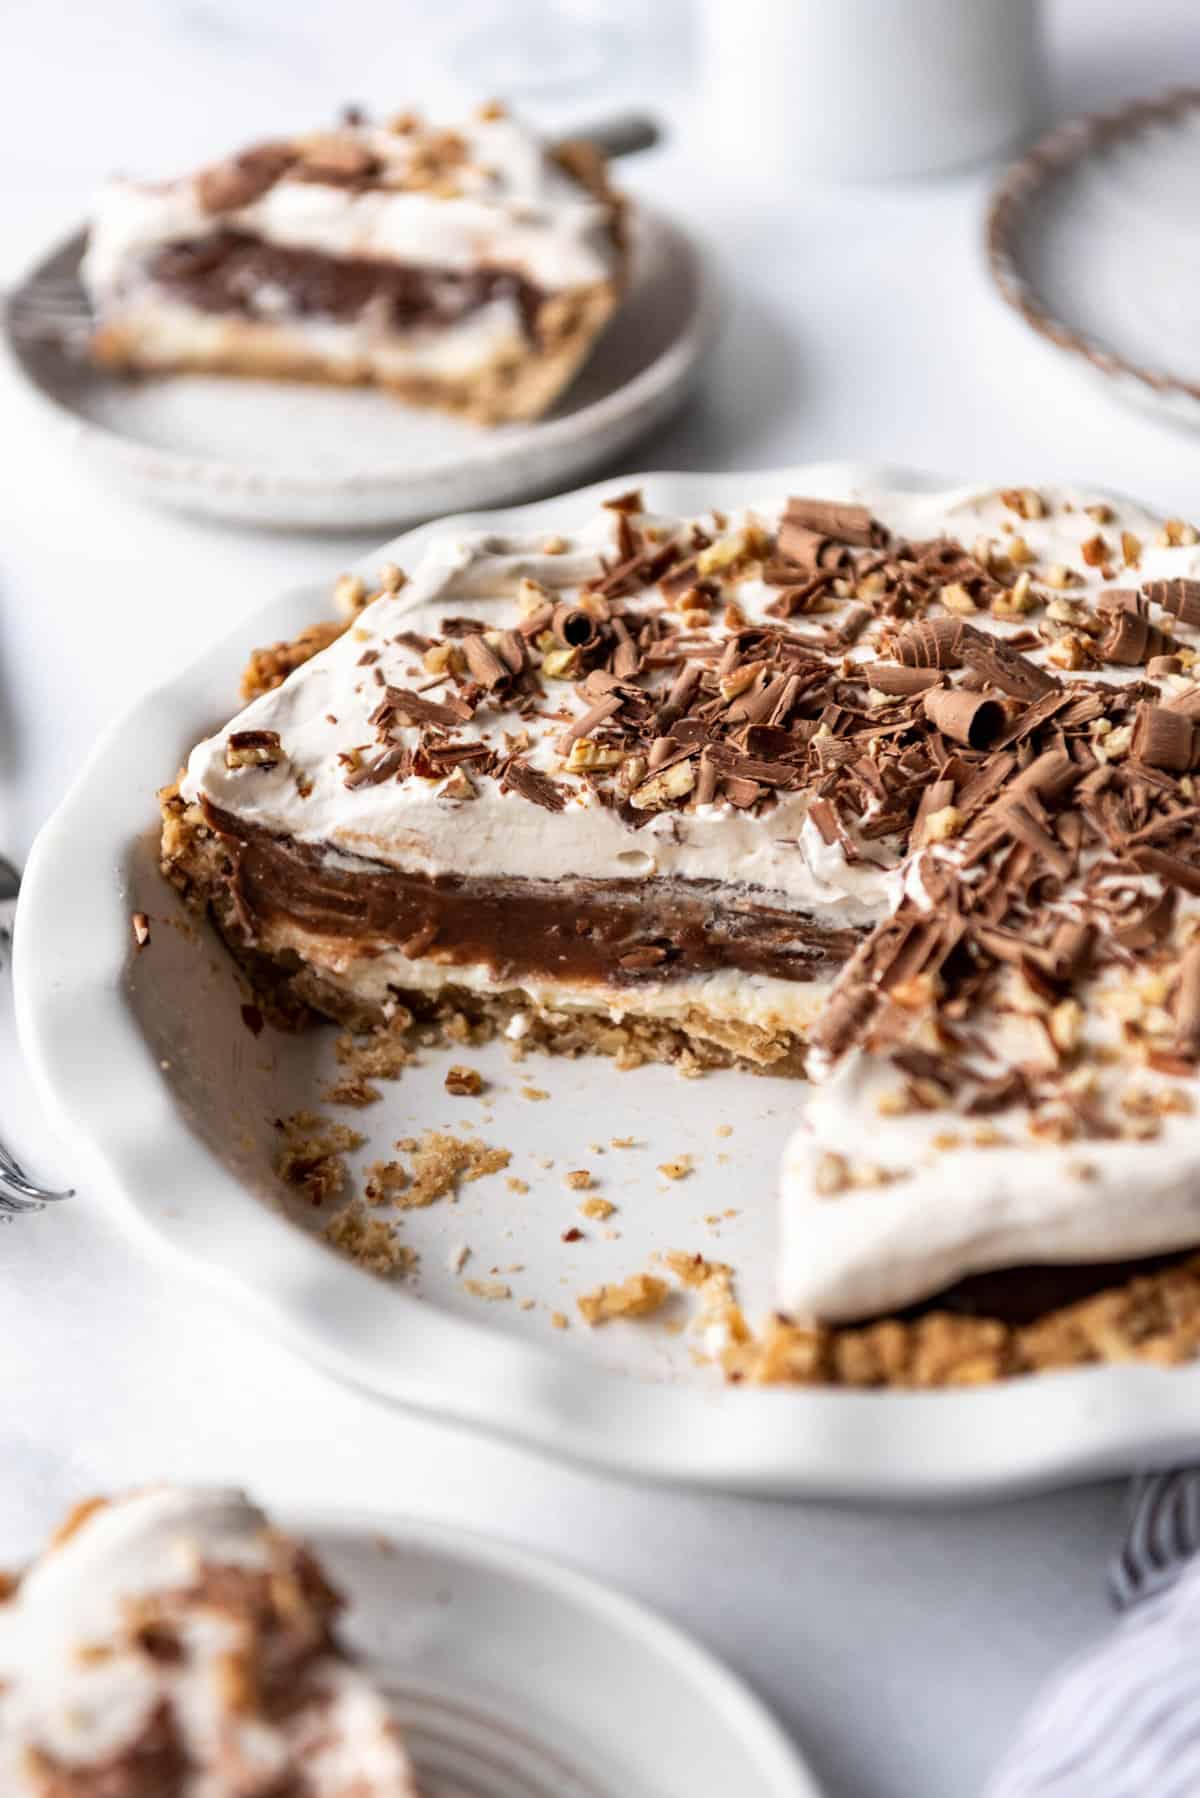 An image of a four-layer delight dessert from Arkansas known as Possum Pie with chocolate shavings and chopped pecans on top.